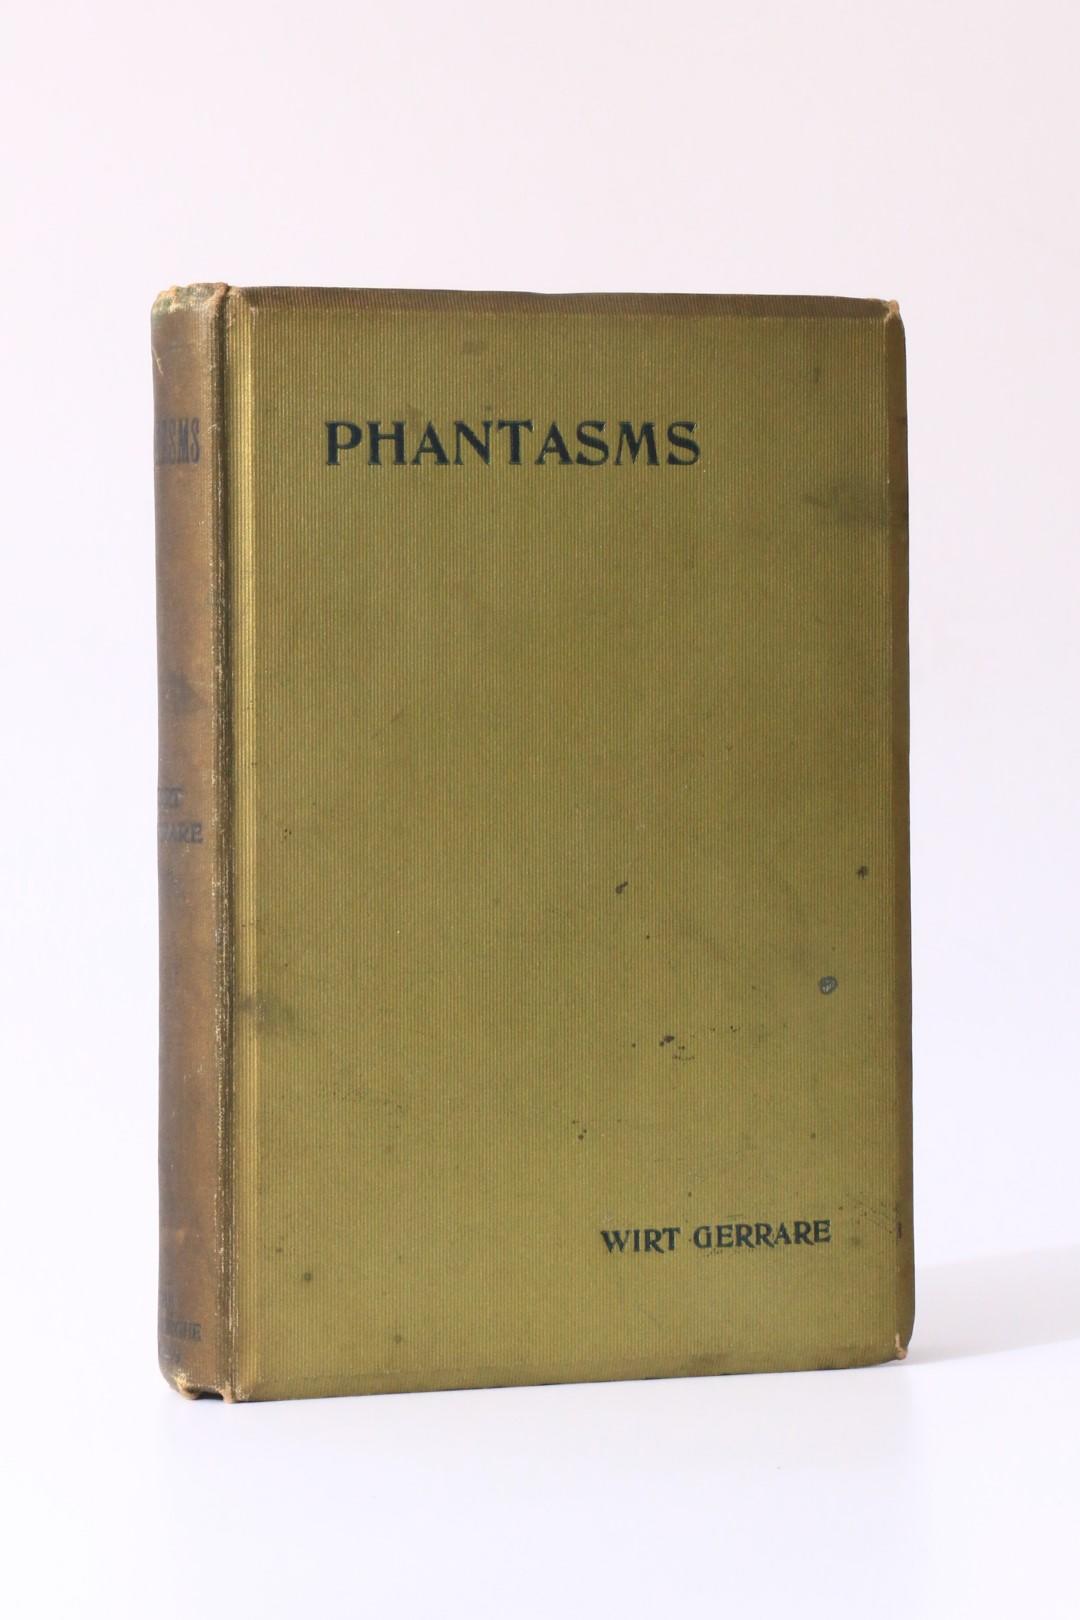 Wirt Gerrare [William Oliver Greene] - Phantasms: Original Stories Illustrating Posthumous Personality and Character - The Roxburghe Press, 1895, First Edition.